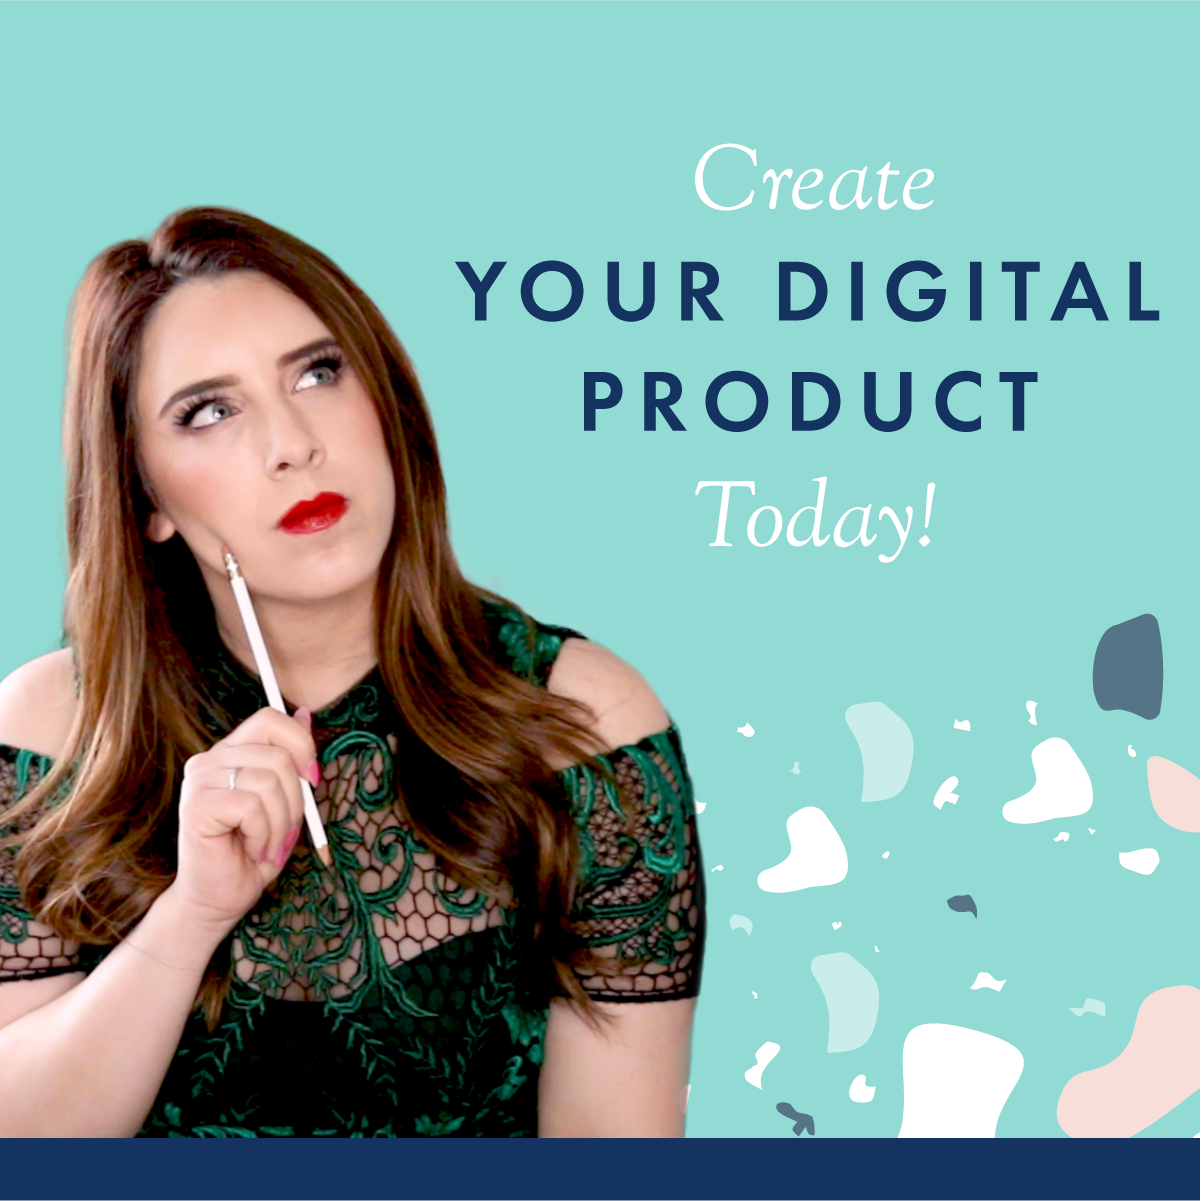 Create your digital product today